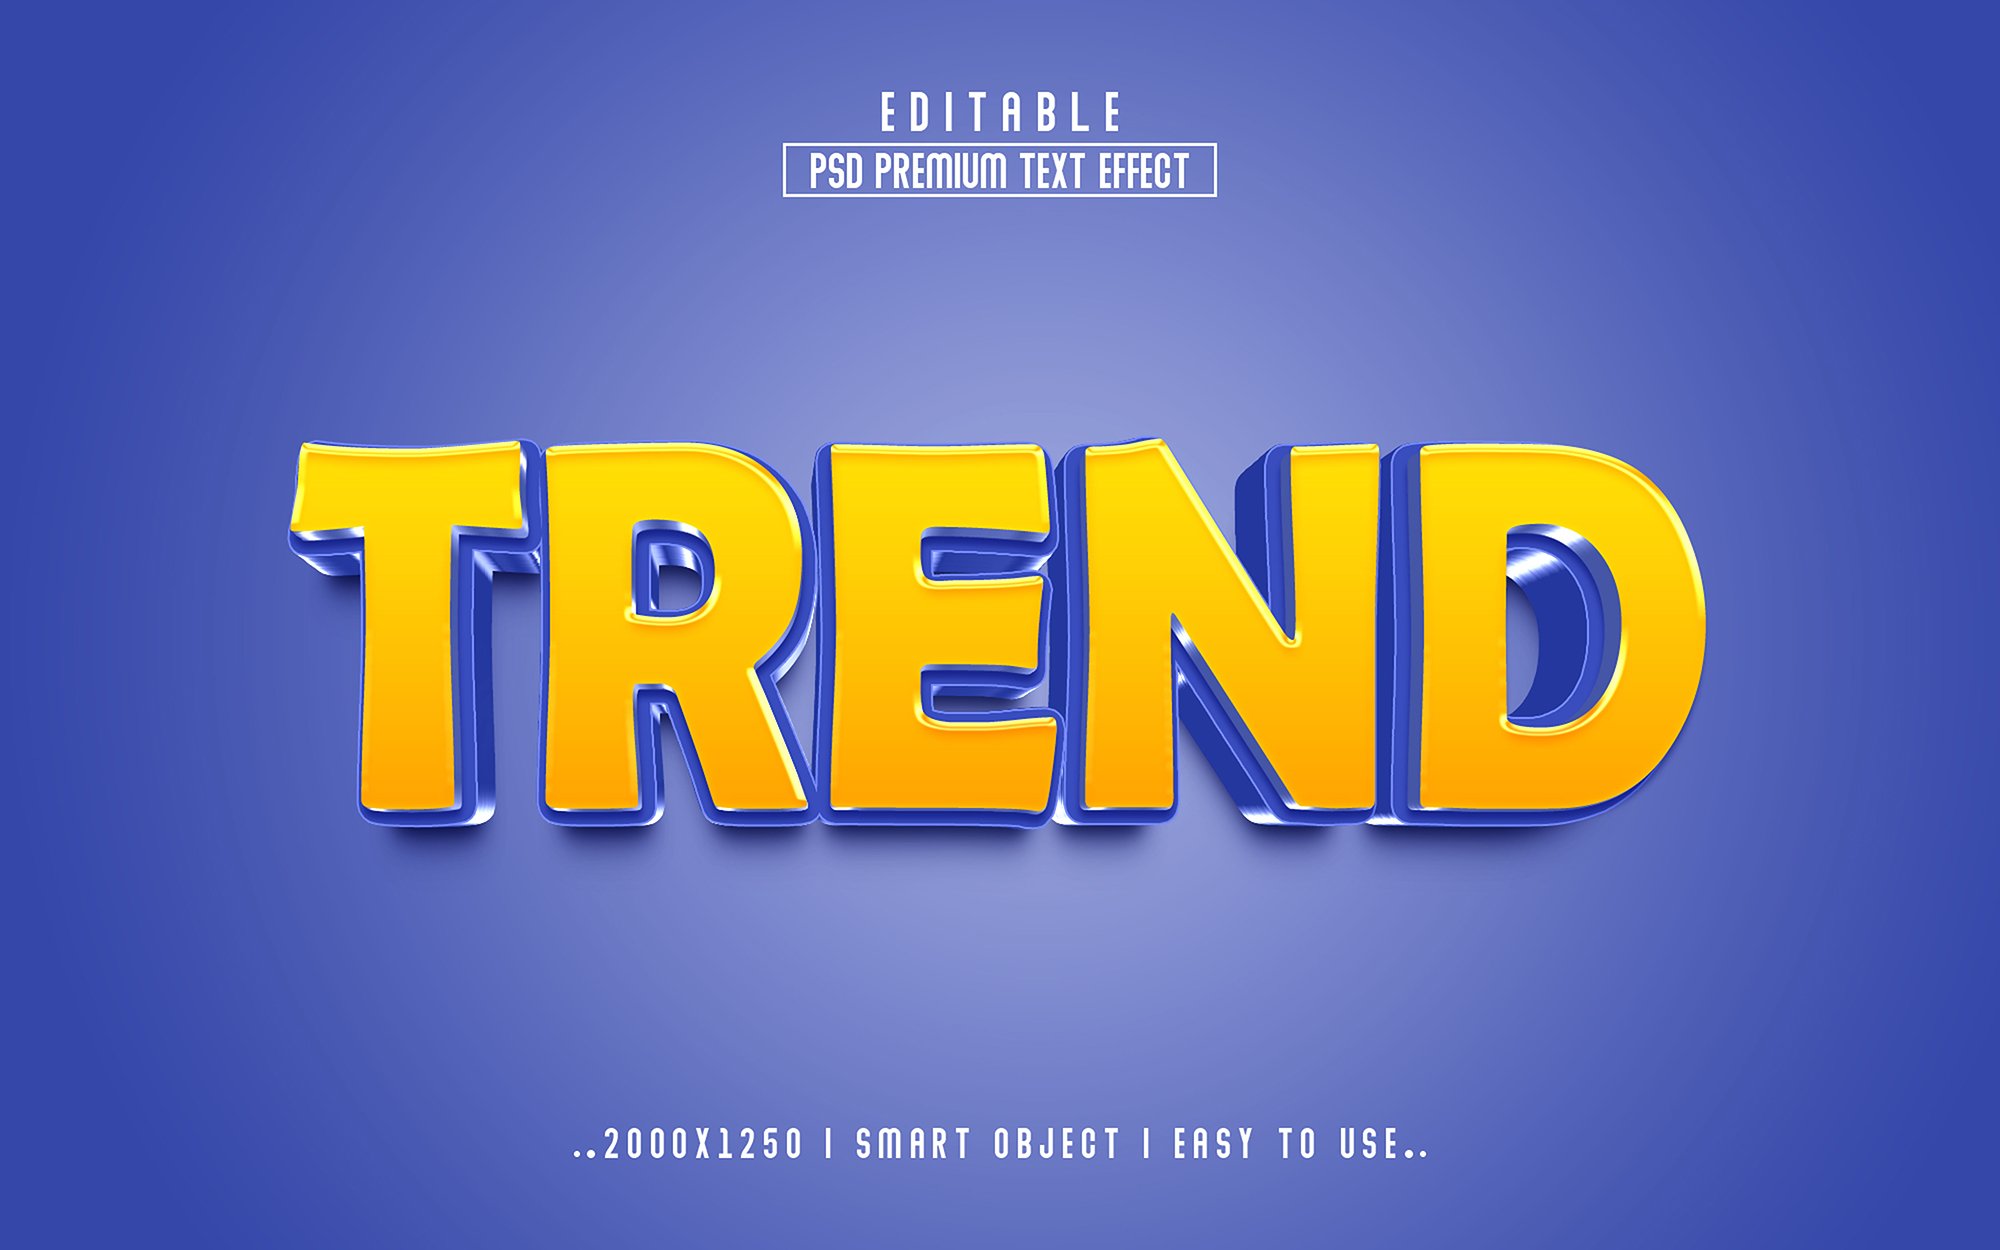 Trend 3D Editable Text Effect stylecover image.